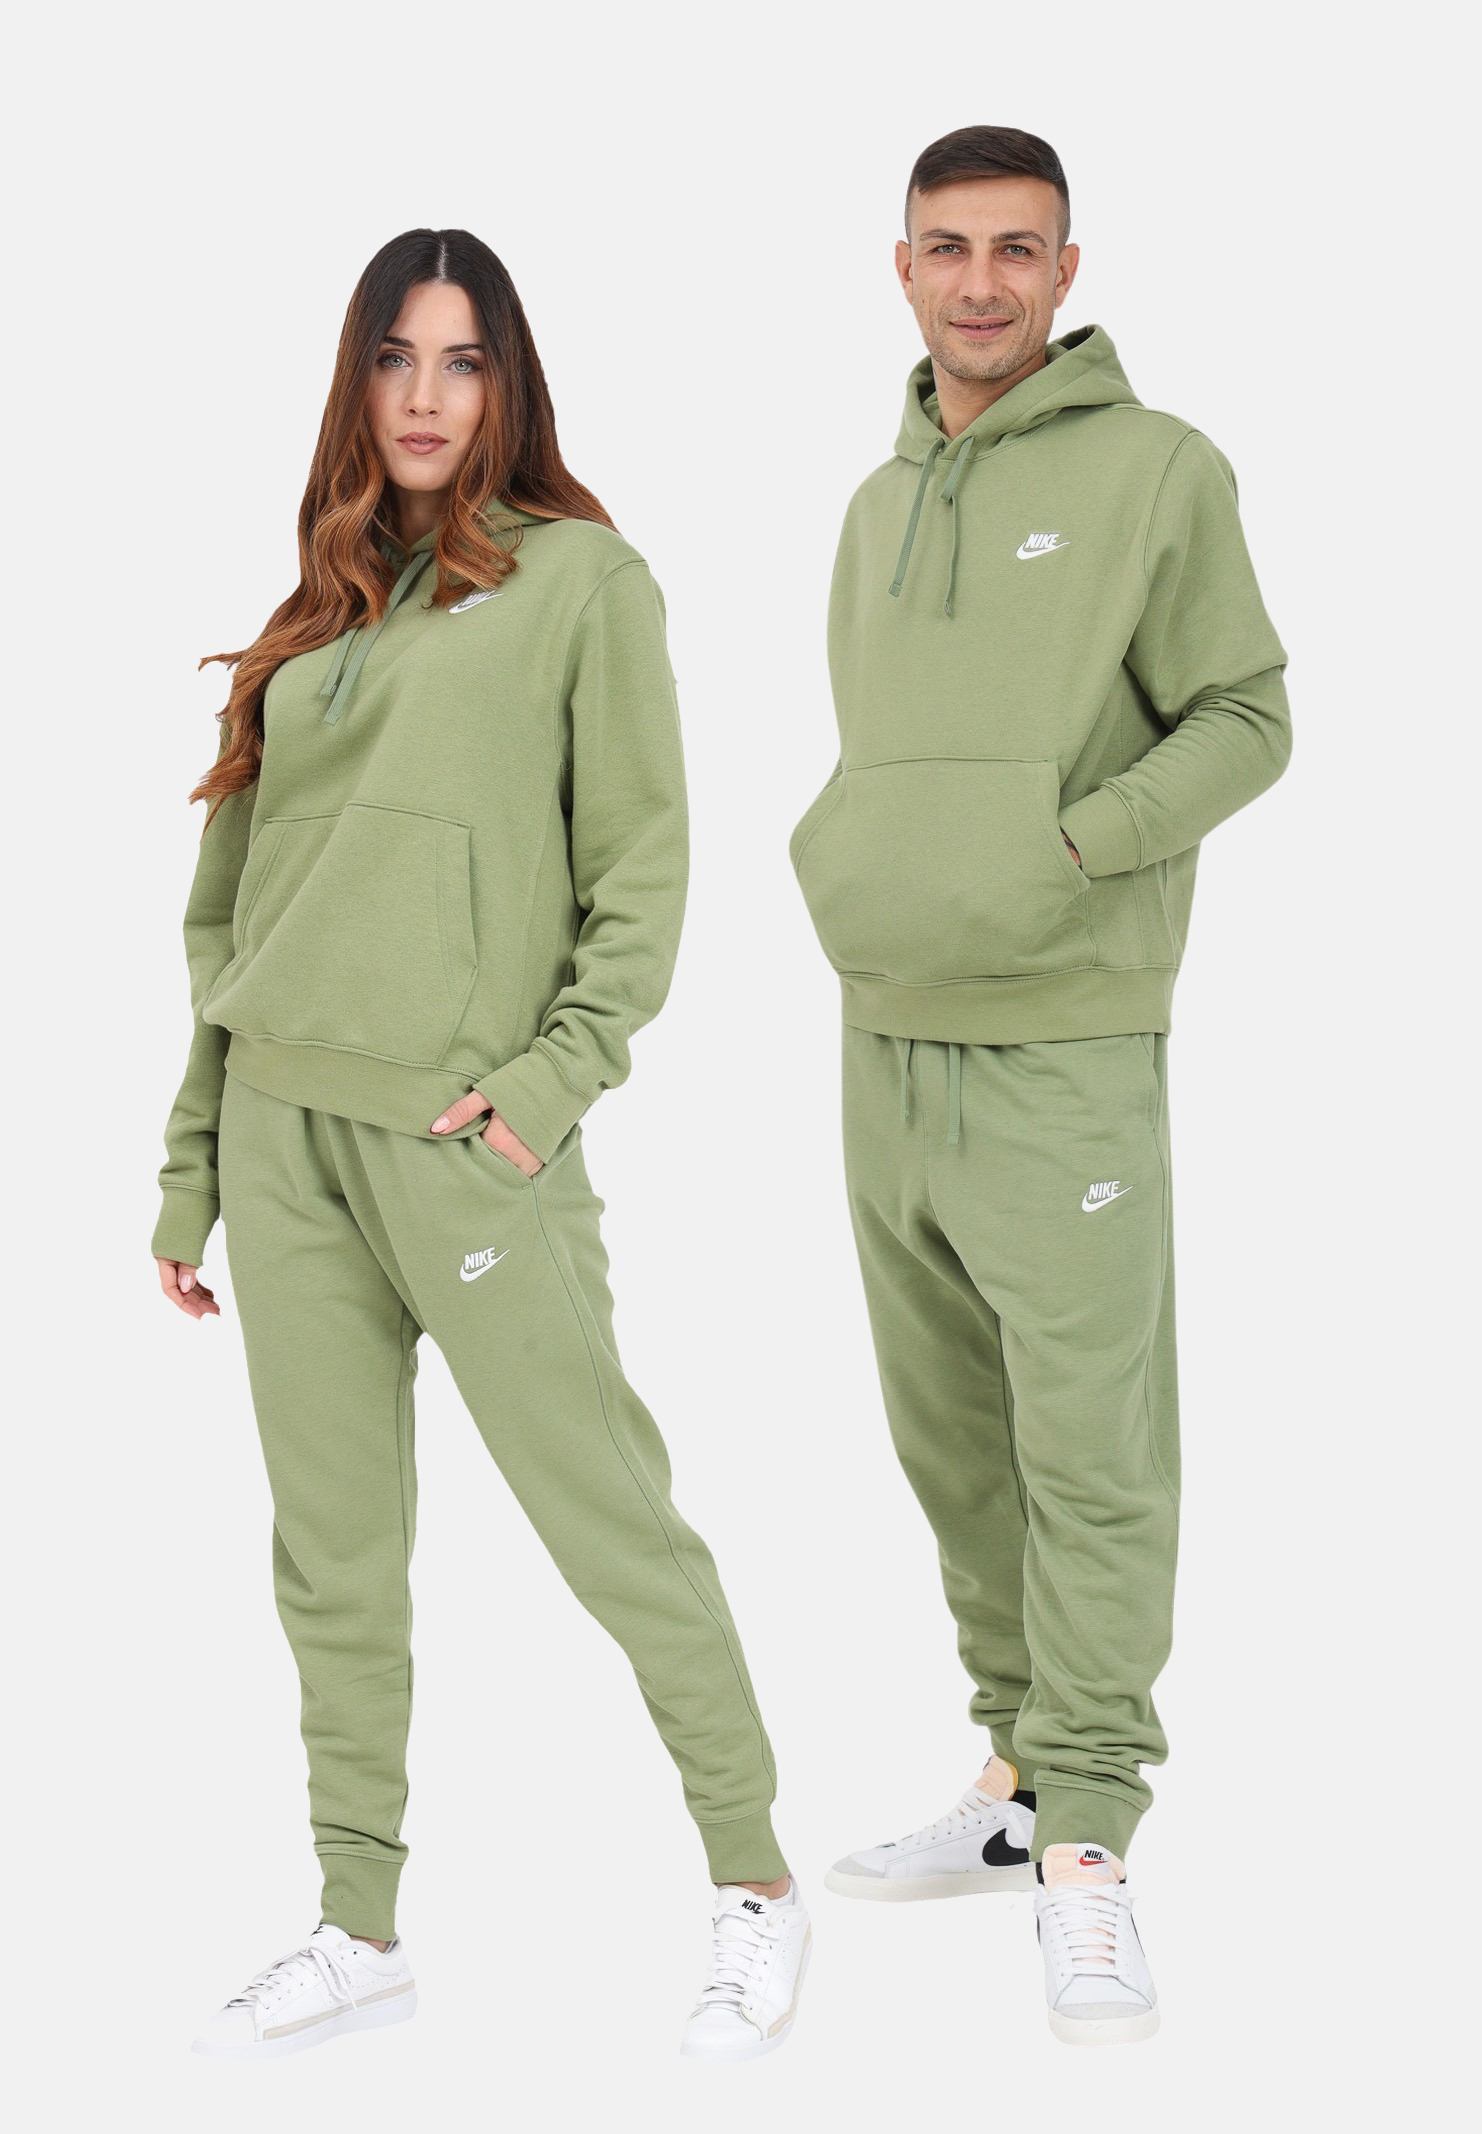 Tracksuit trousers for men and women in asparagus green cotton